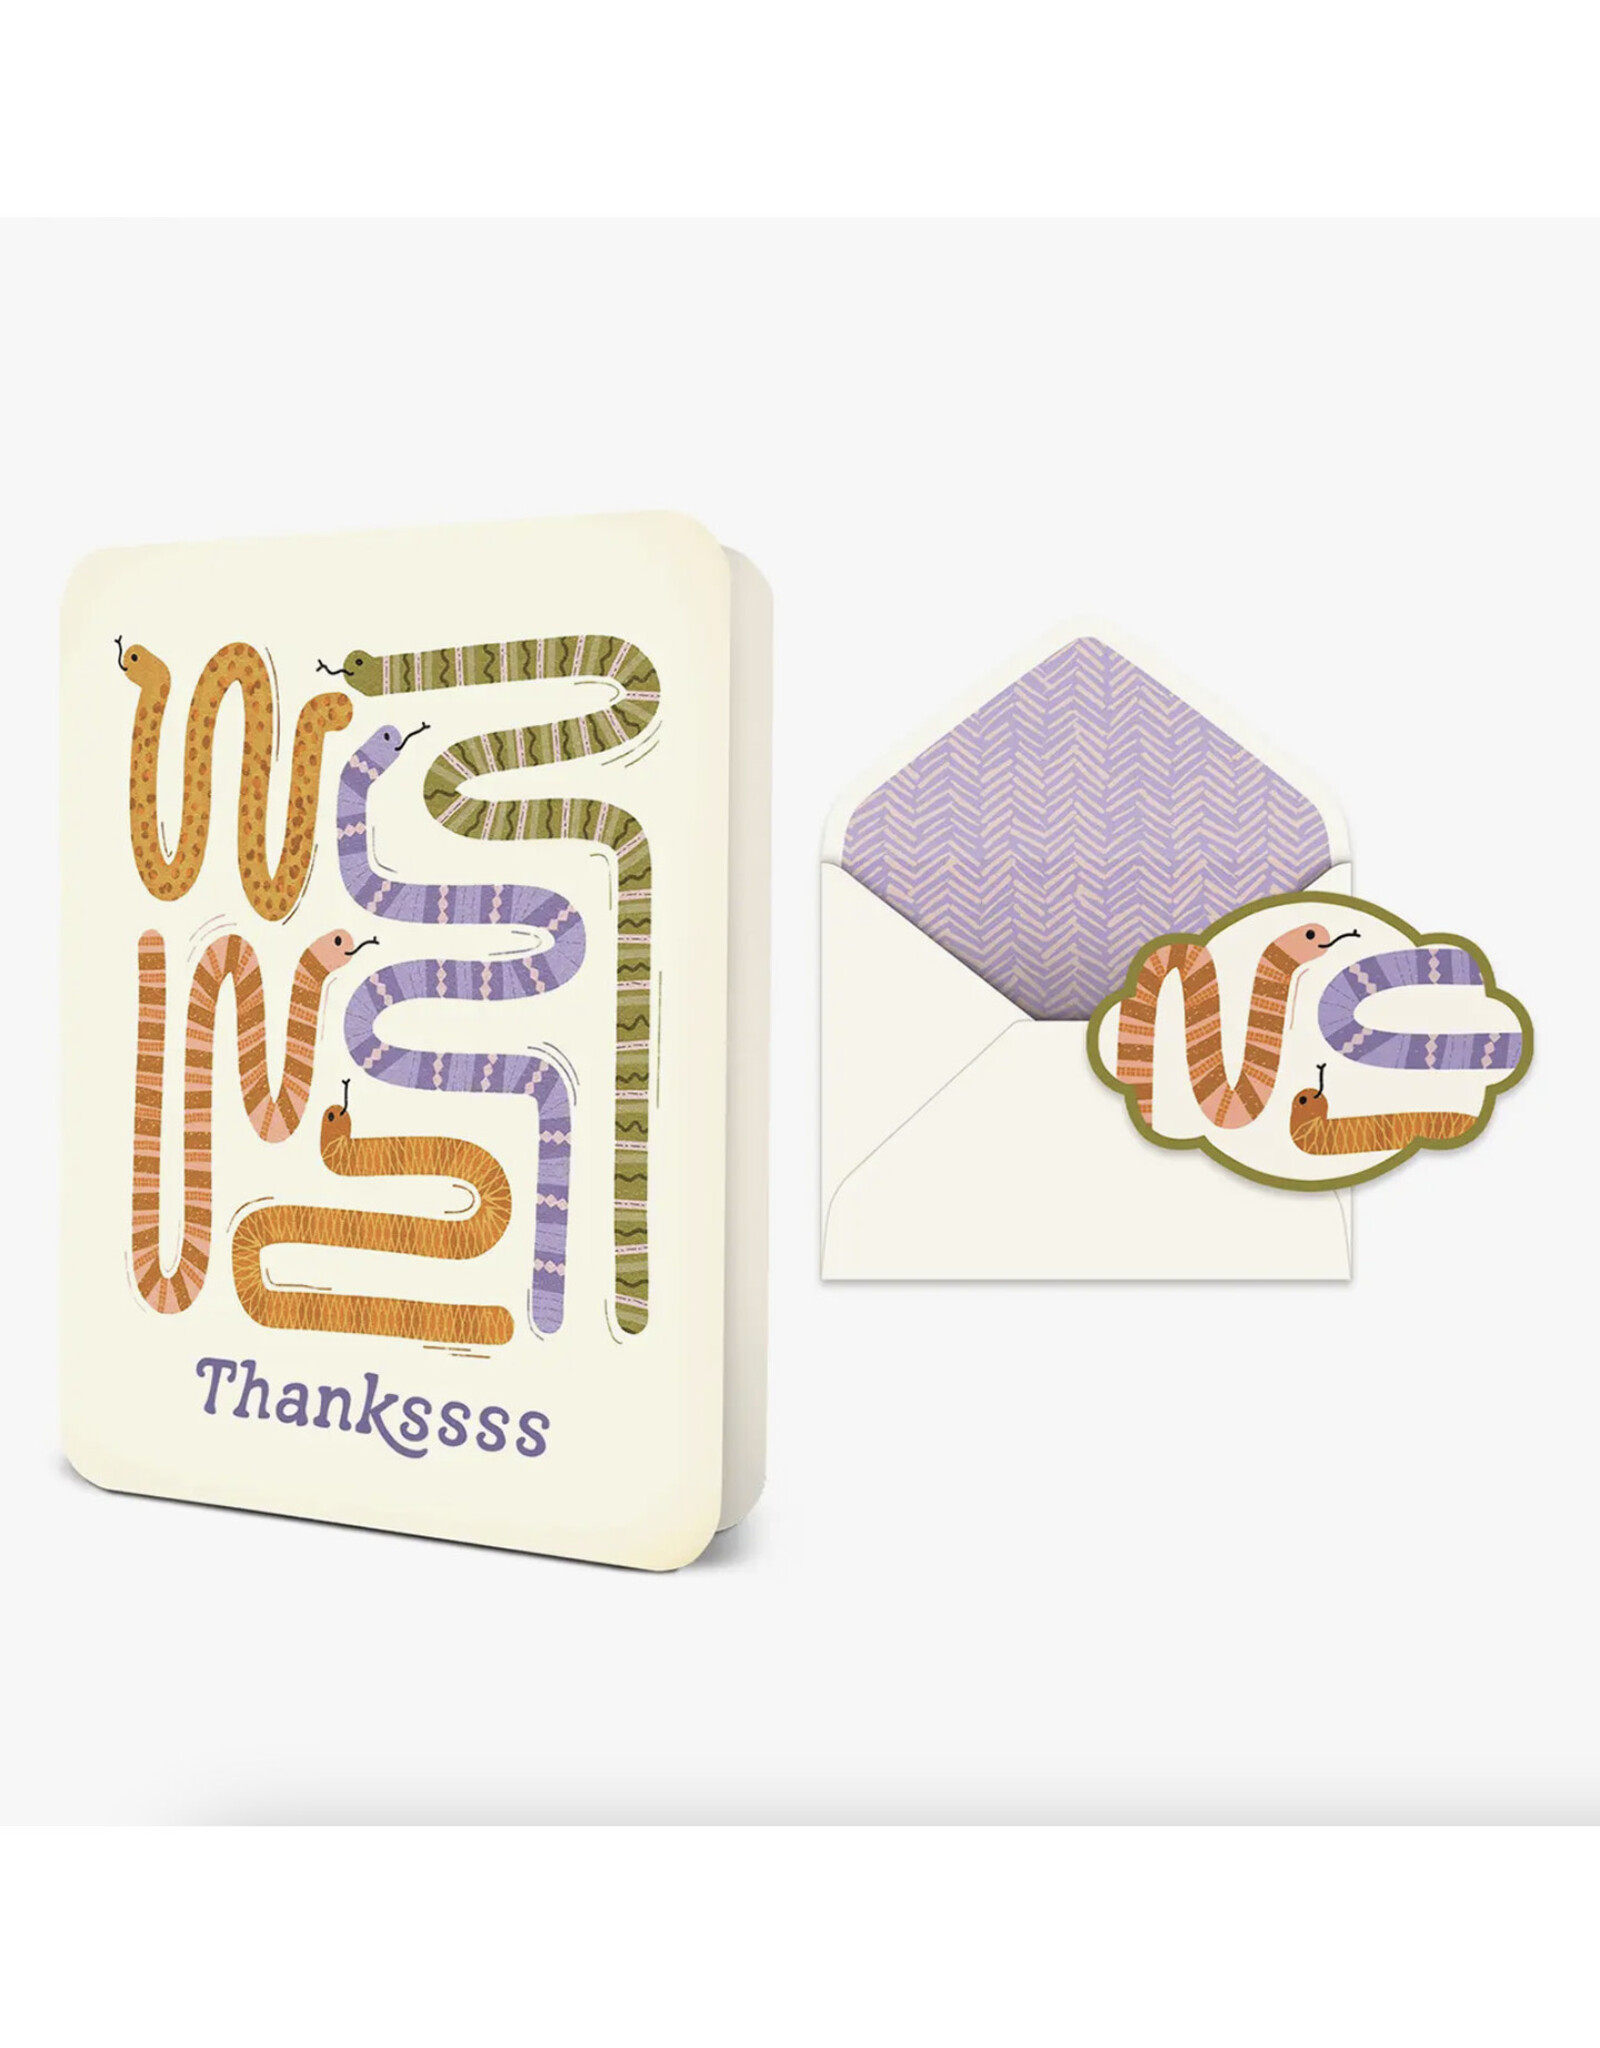 Thankssss Snakes Greeting Card